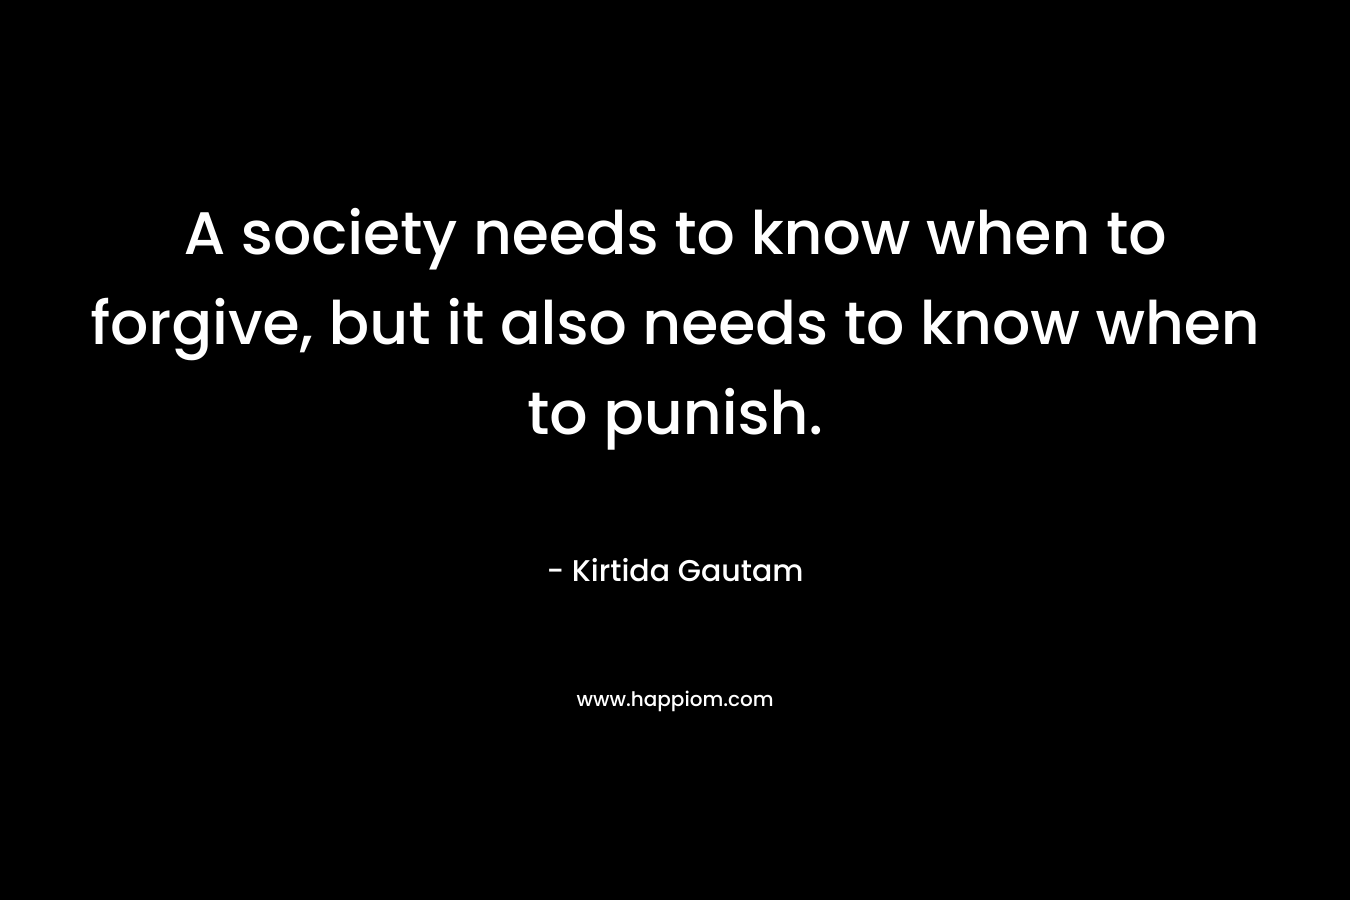 A society needs to know when to forgive, but it also needs to know when to punish. – Kirtida Gautam